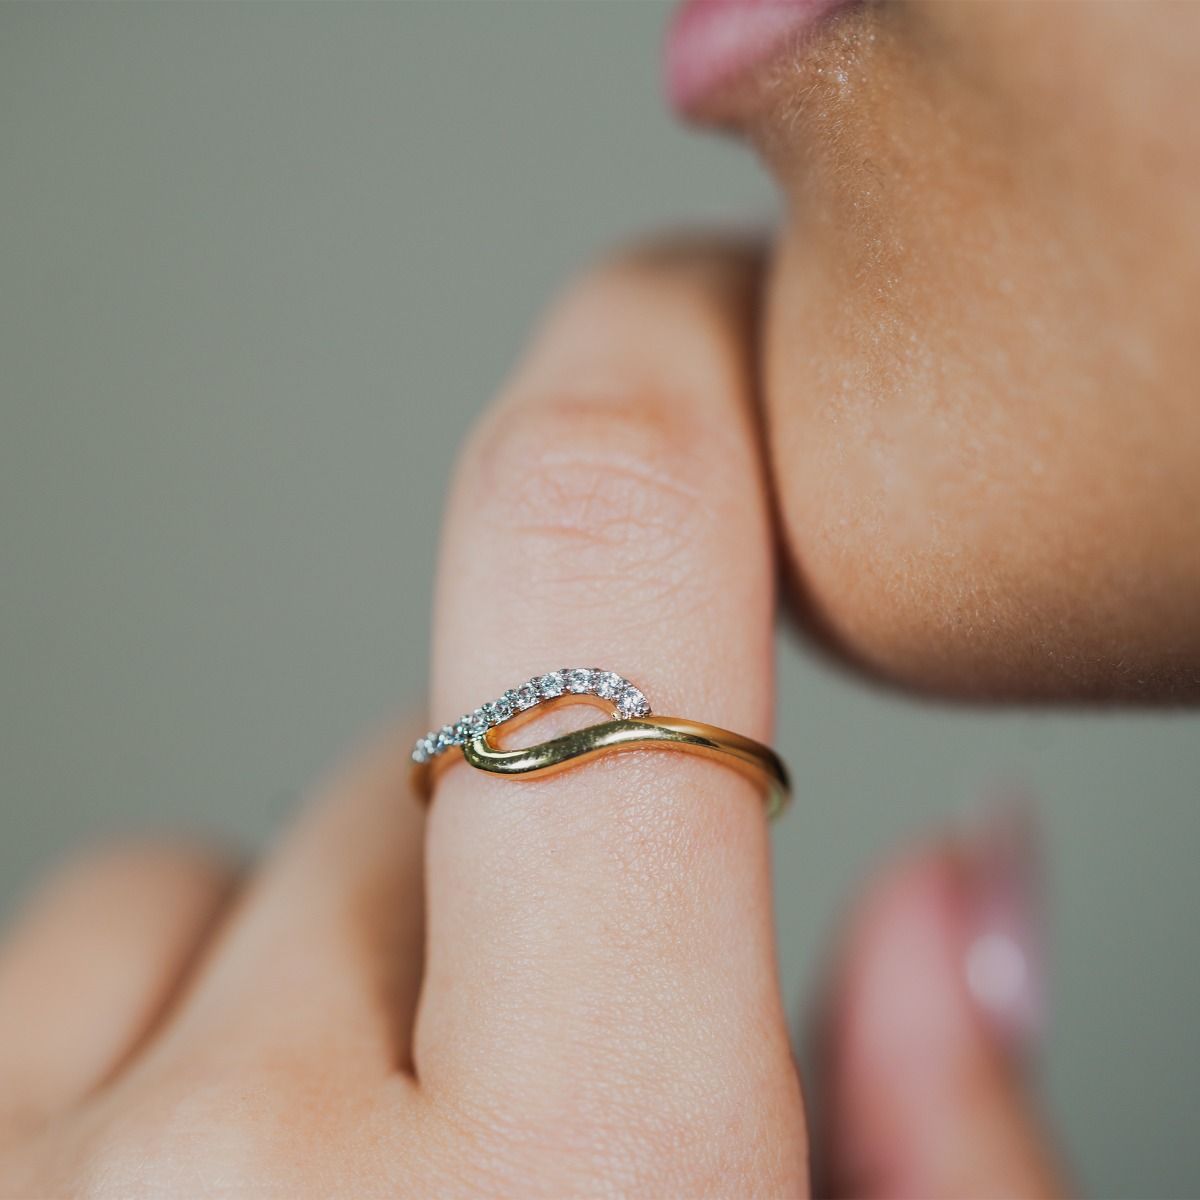 Elevate your style with the Two-Tone Pave and Polished Tide Ring. Crafted with precision, this necklace showcases intertwining gold-polished and cubic zirconia pave bands, creating a captivating organic design. 